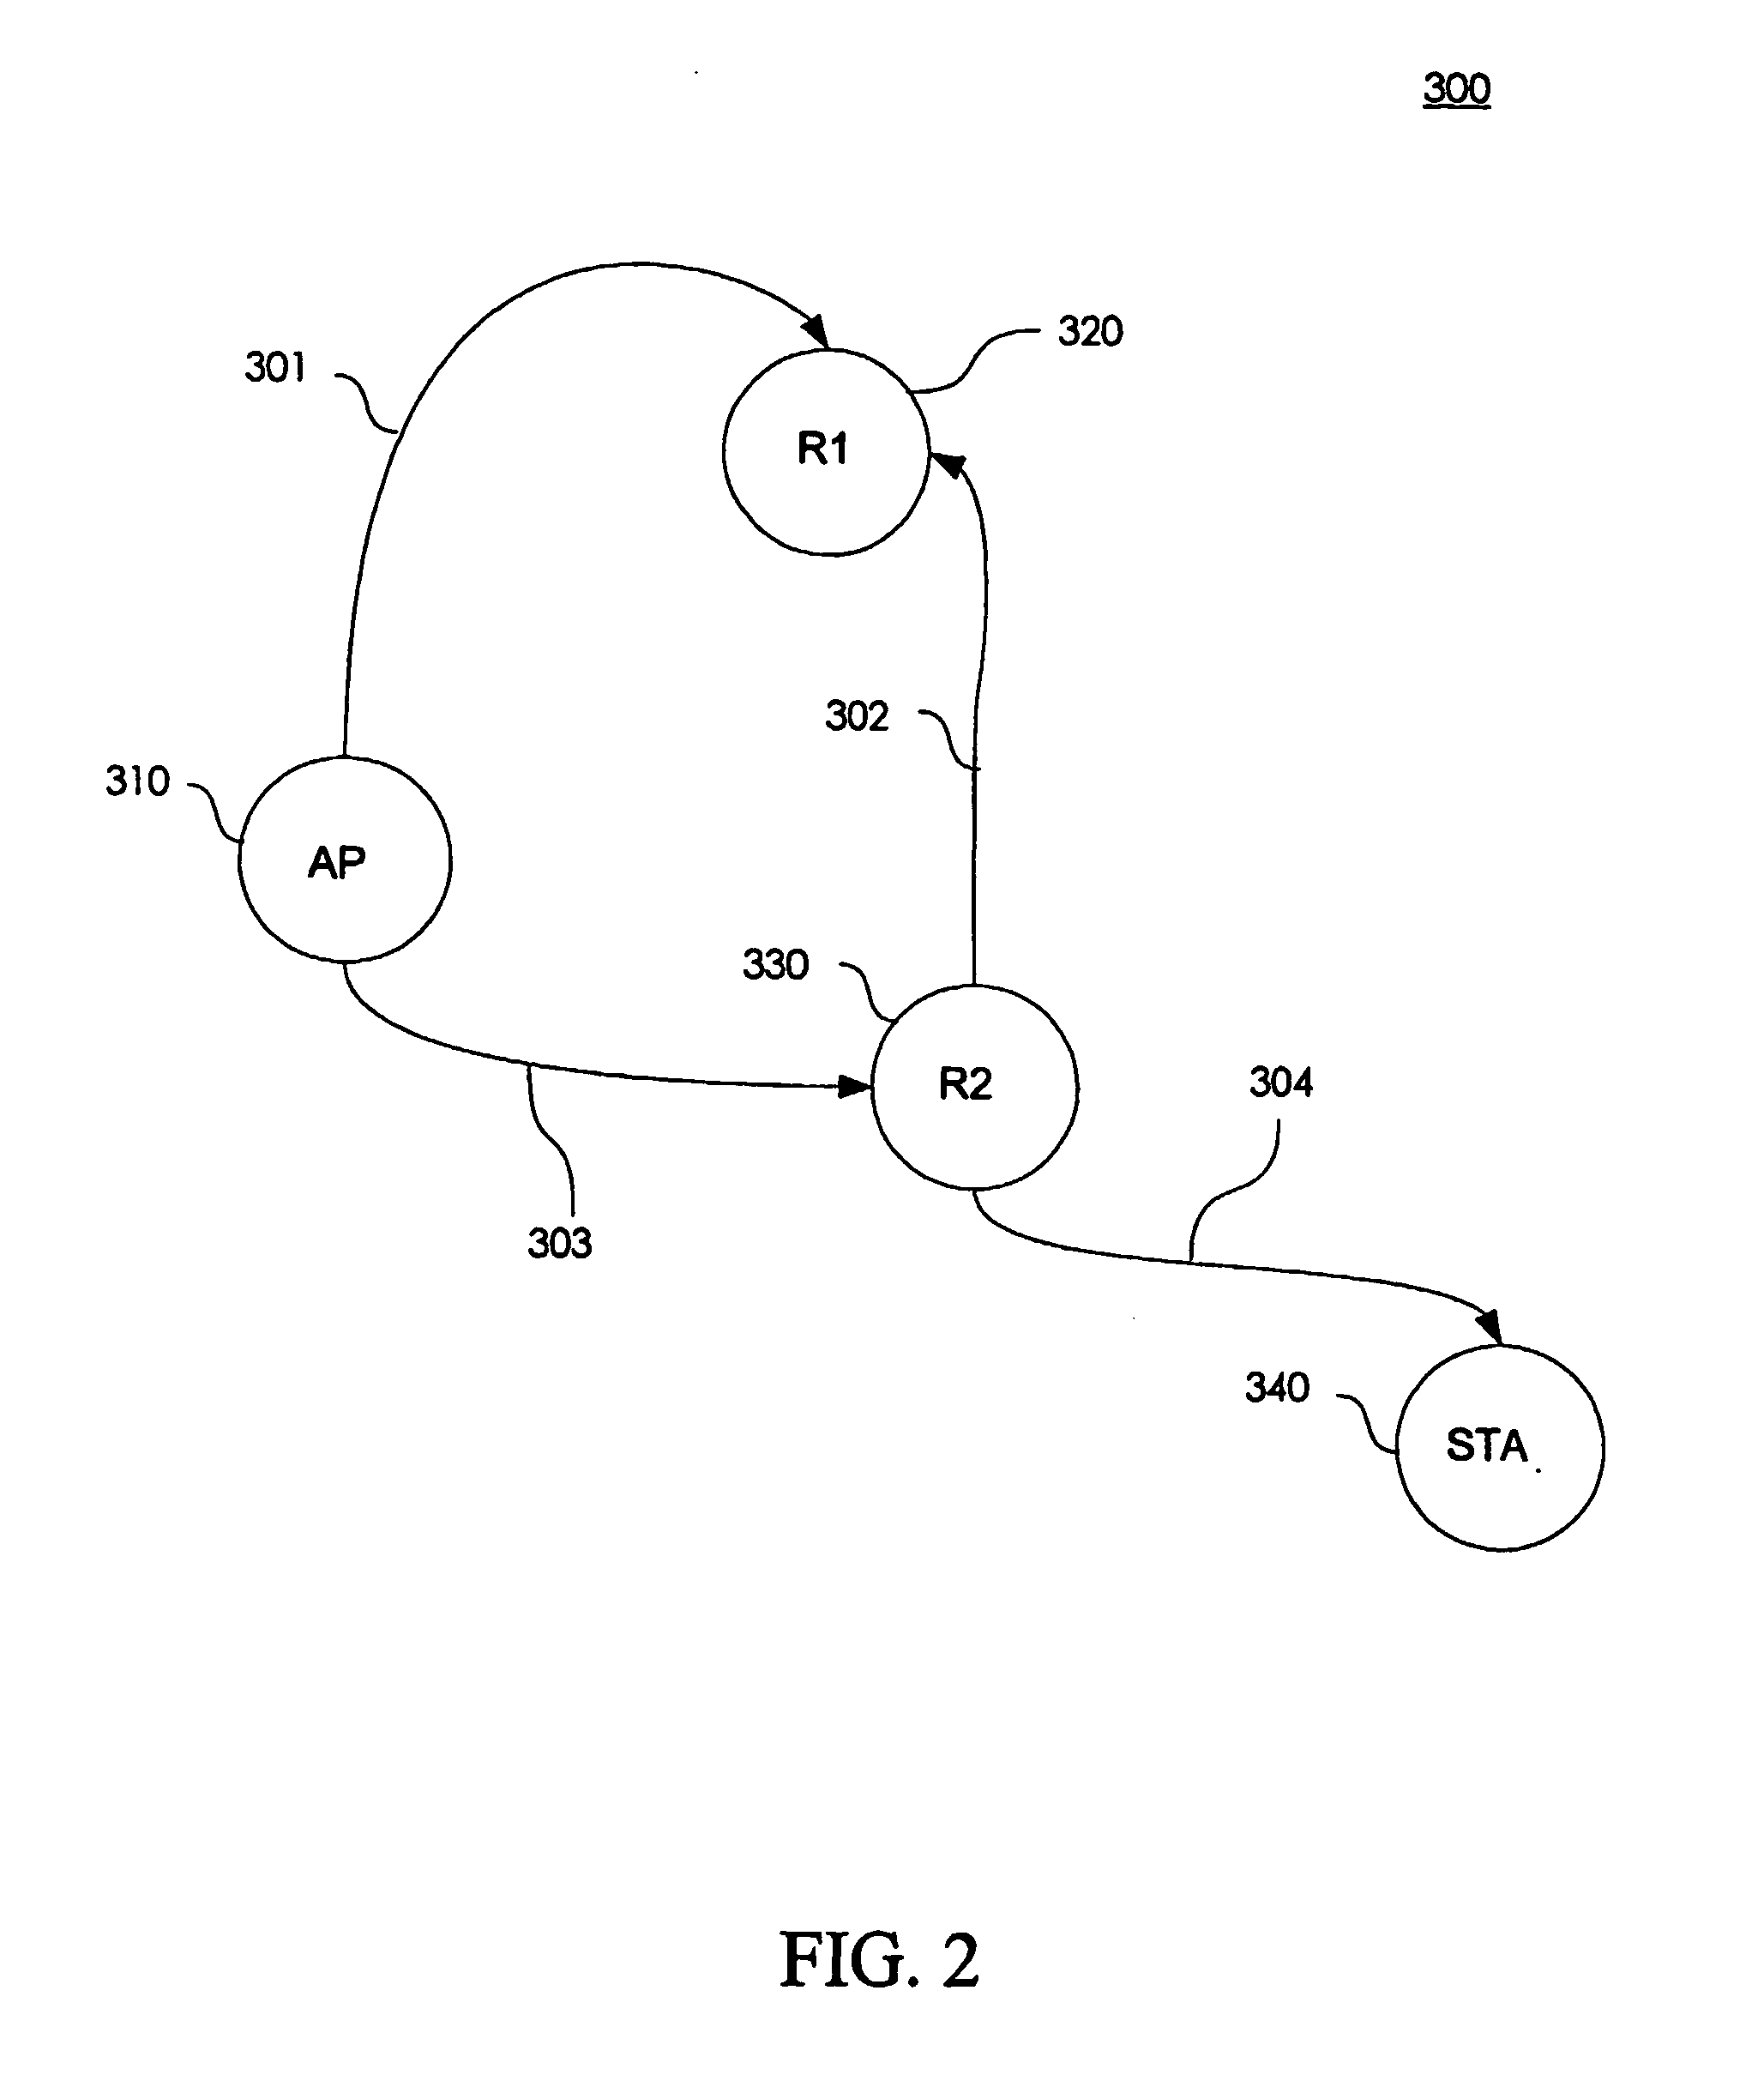 Reducing loop effects in a wireless local area network repeater